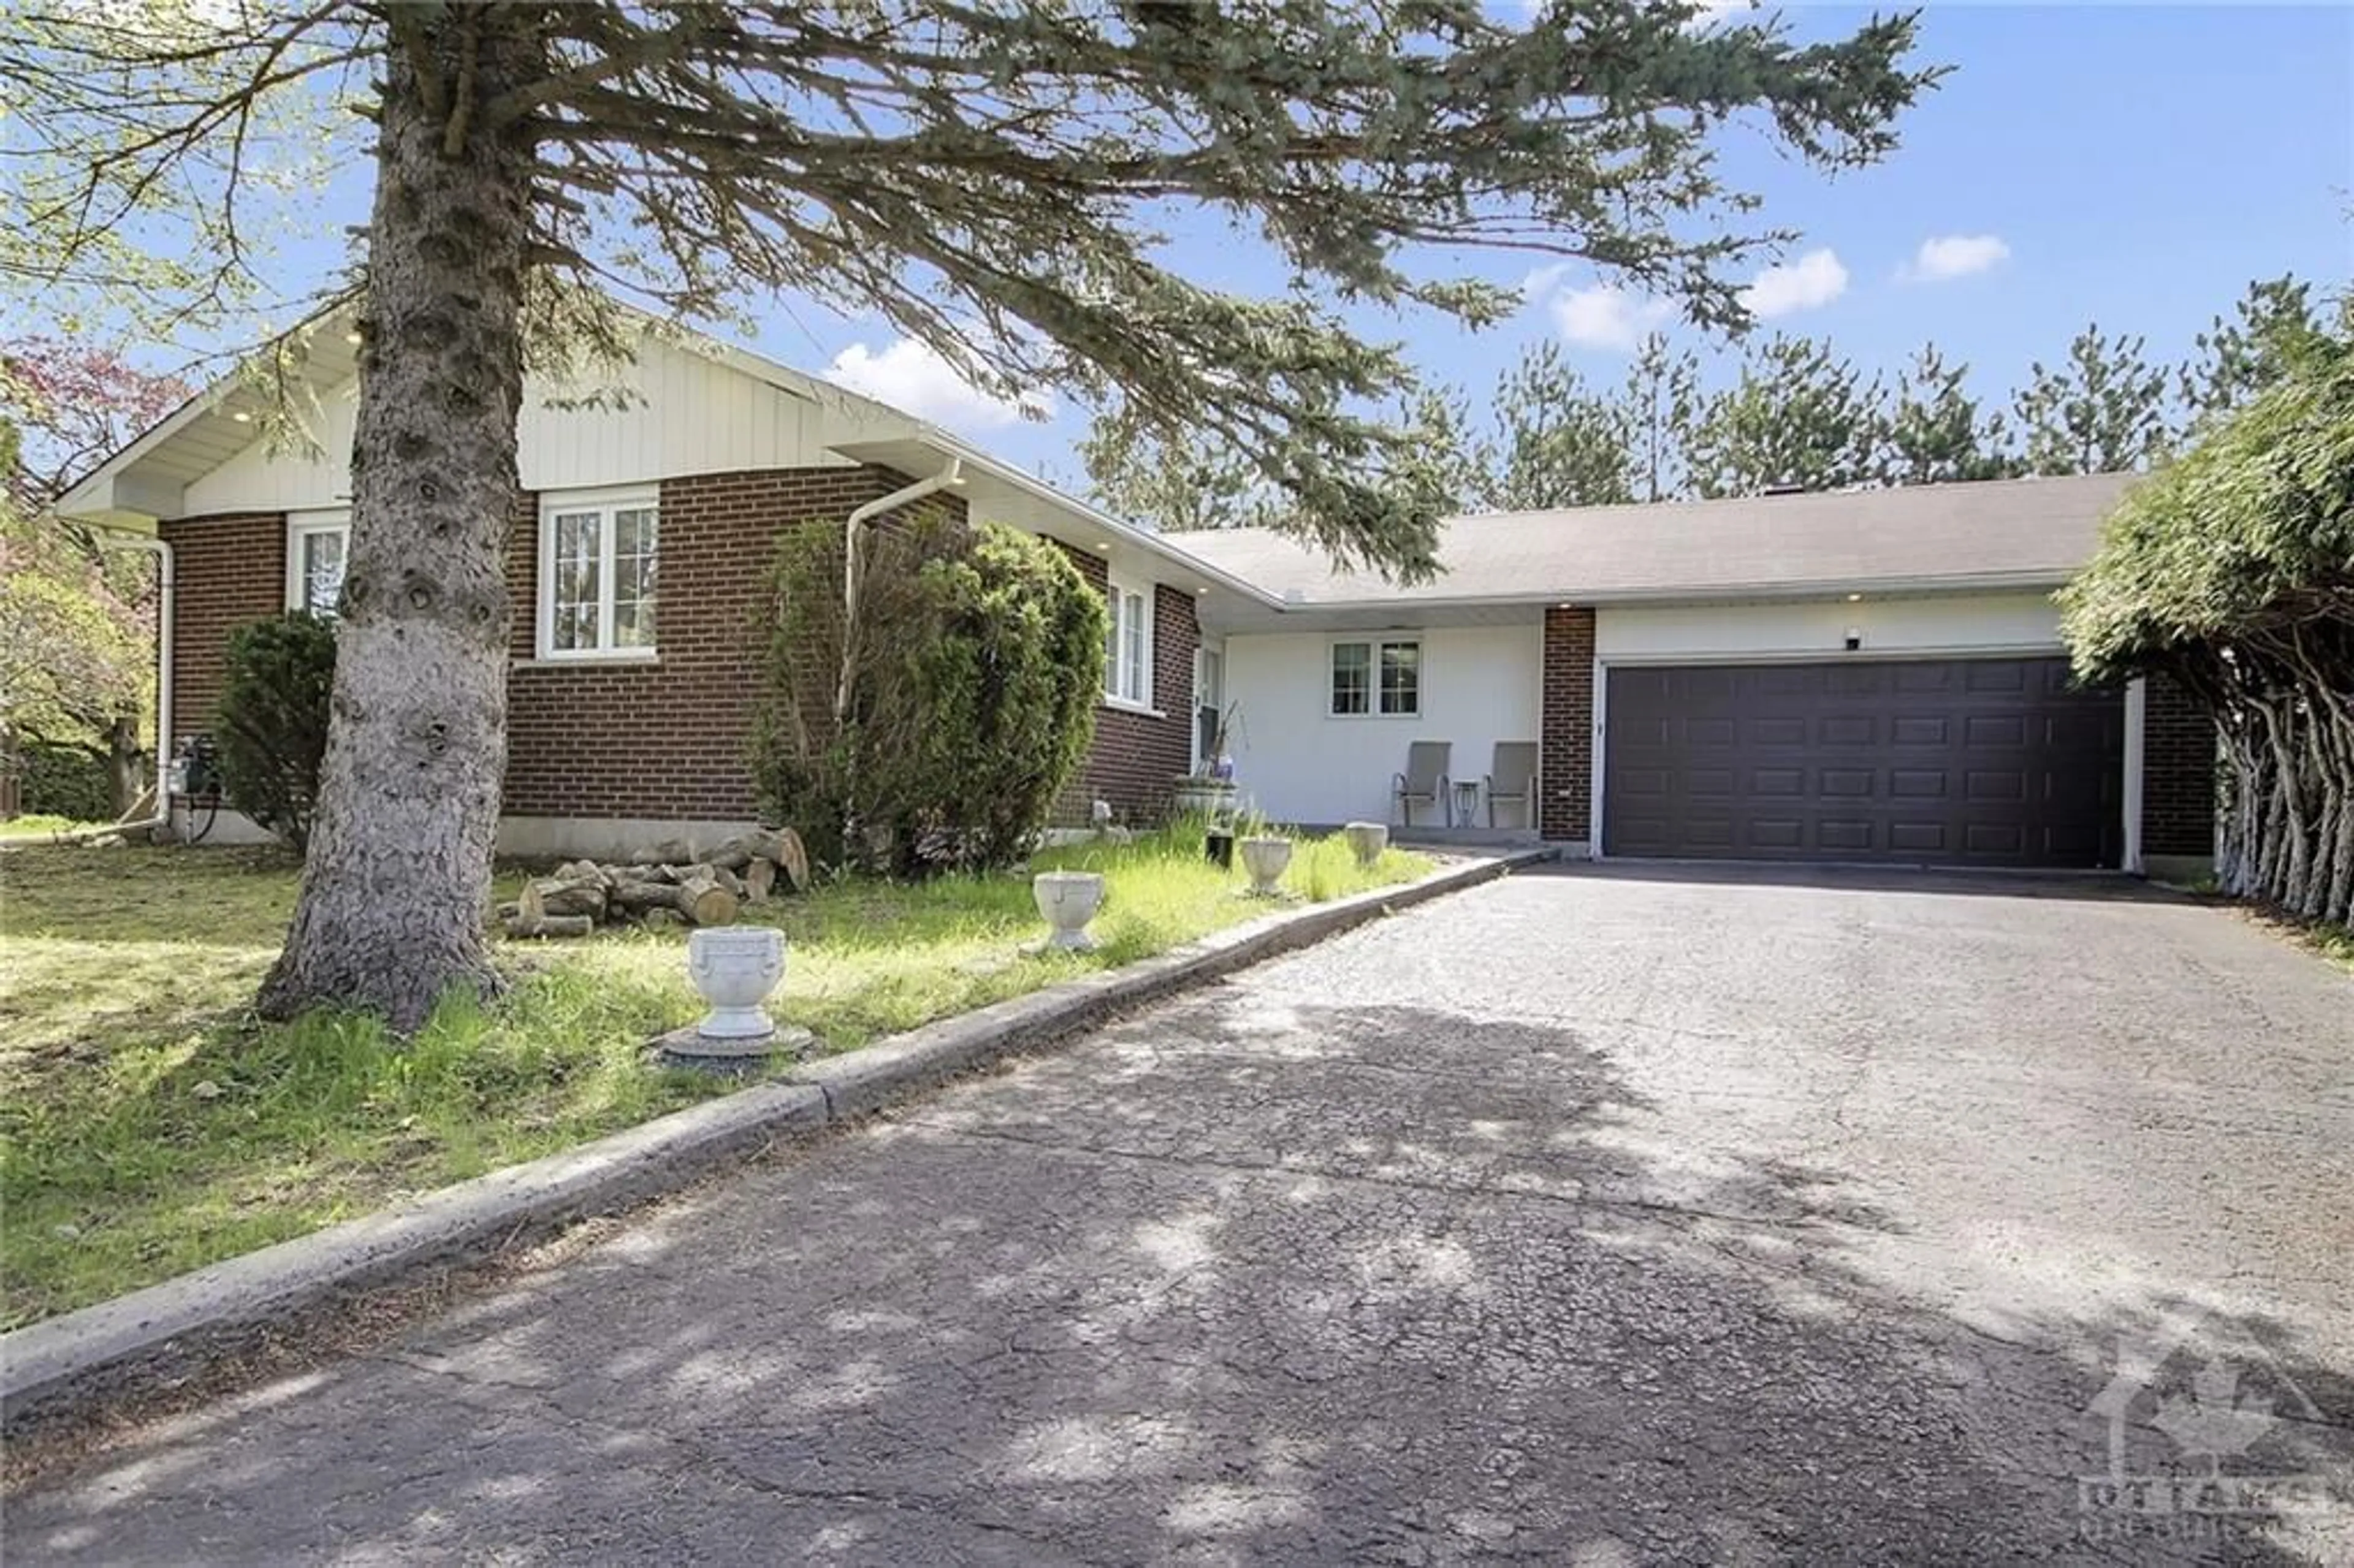 Outside view for 7038 SHIELDS Dr, Greely Ontario K4P 1A7